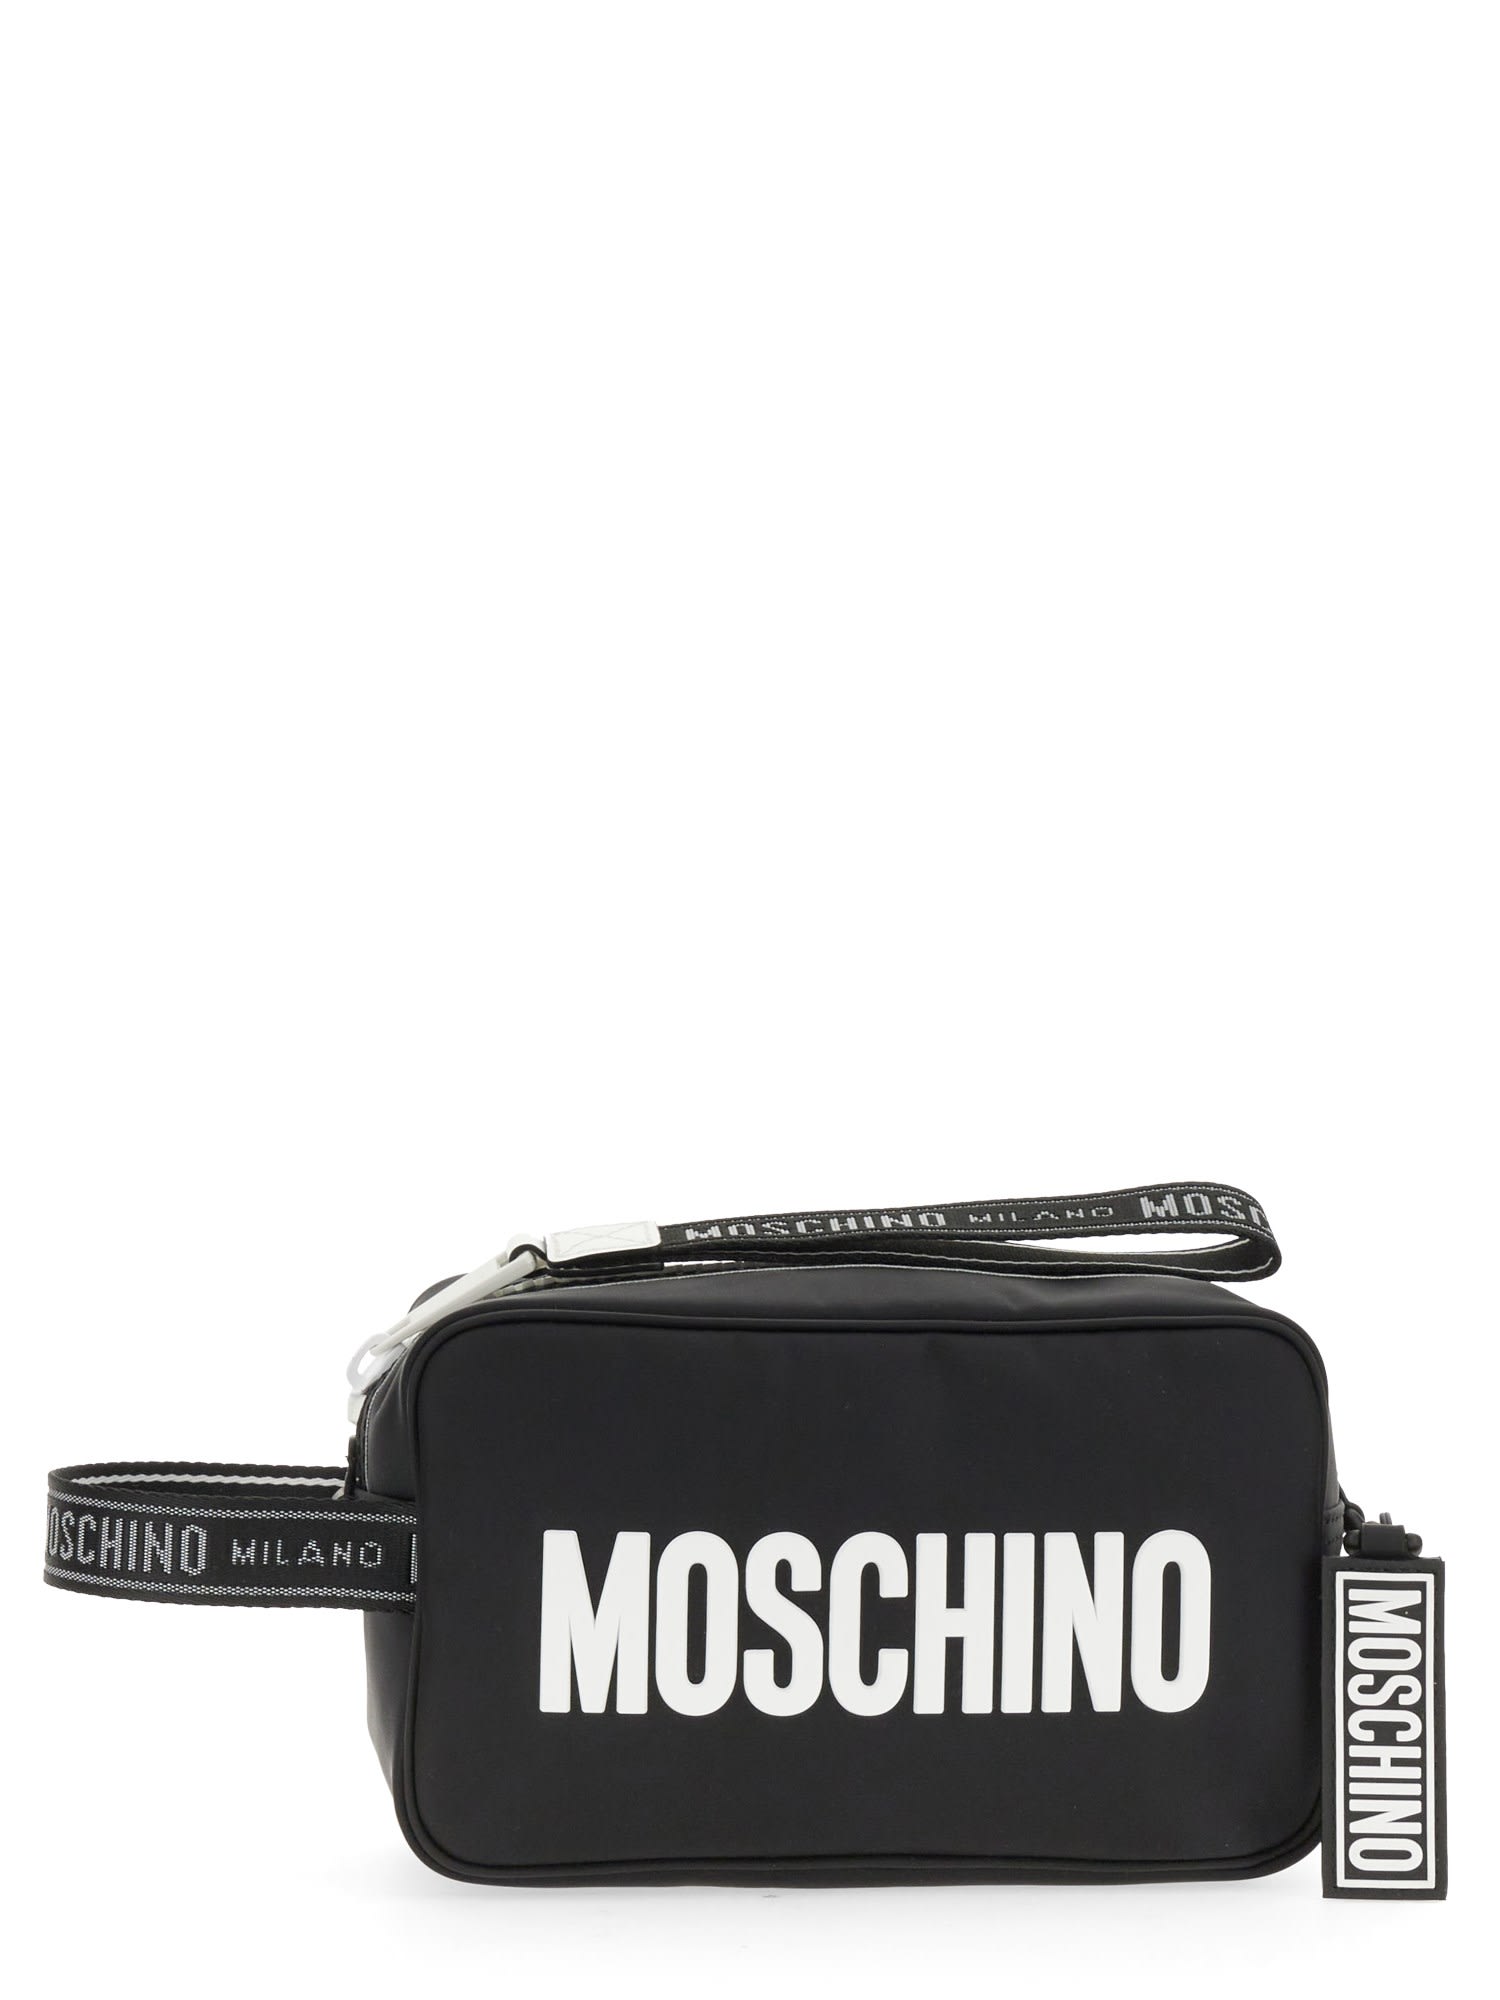 MOSCHINO BEAUTY CASE WITH LOGO